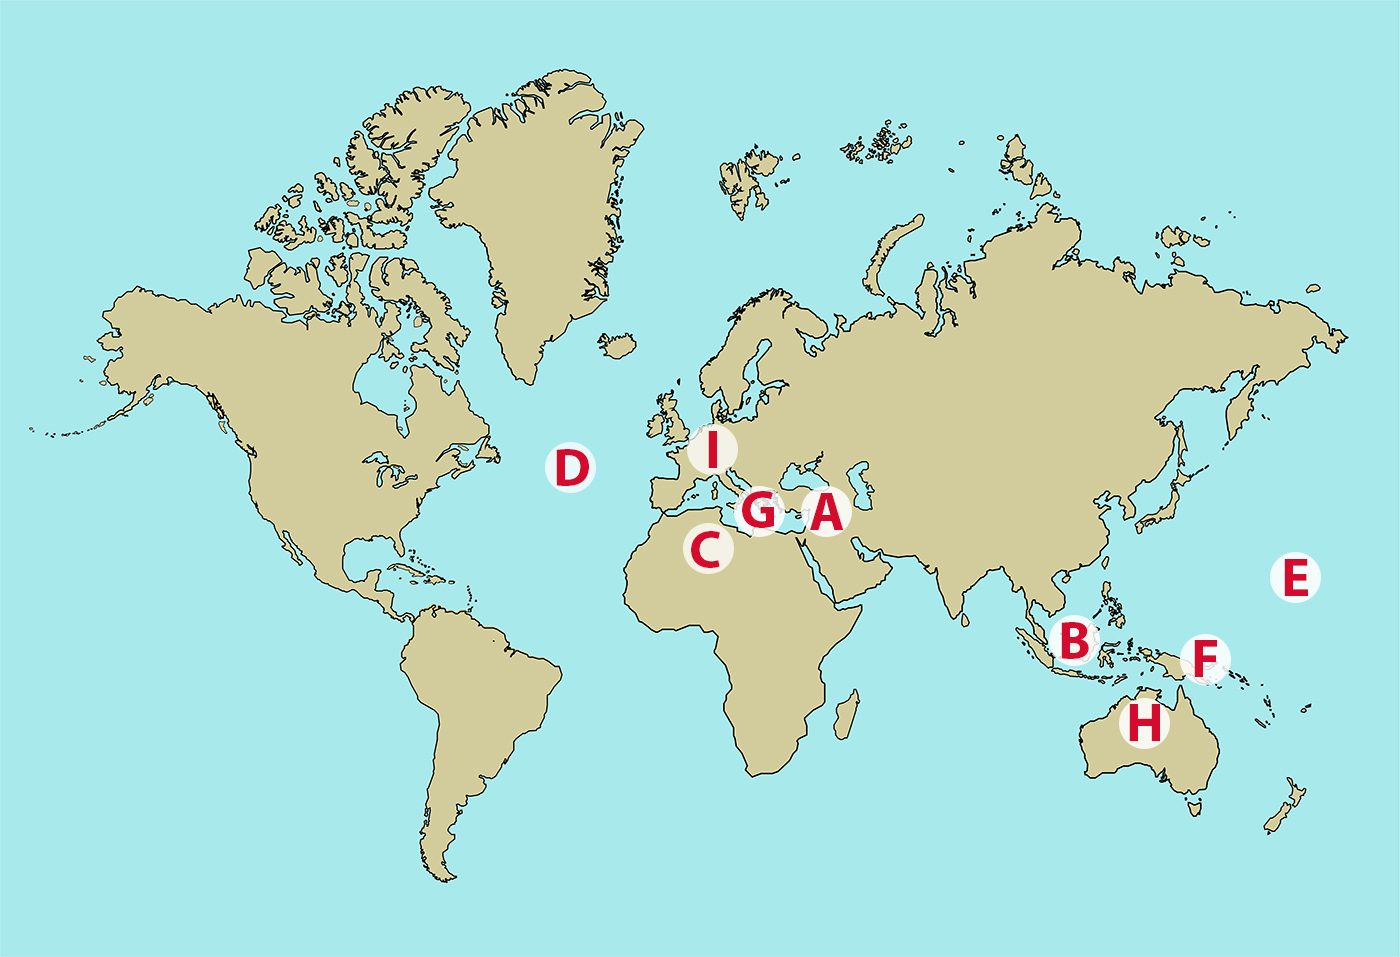 Map of the world labelled with letters A-I